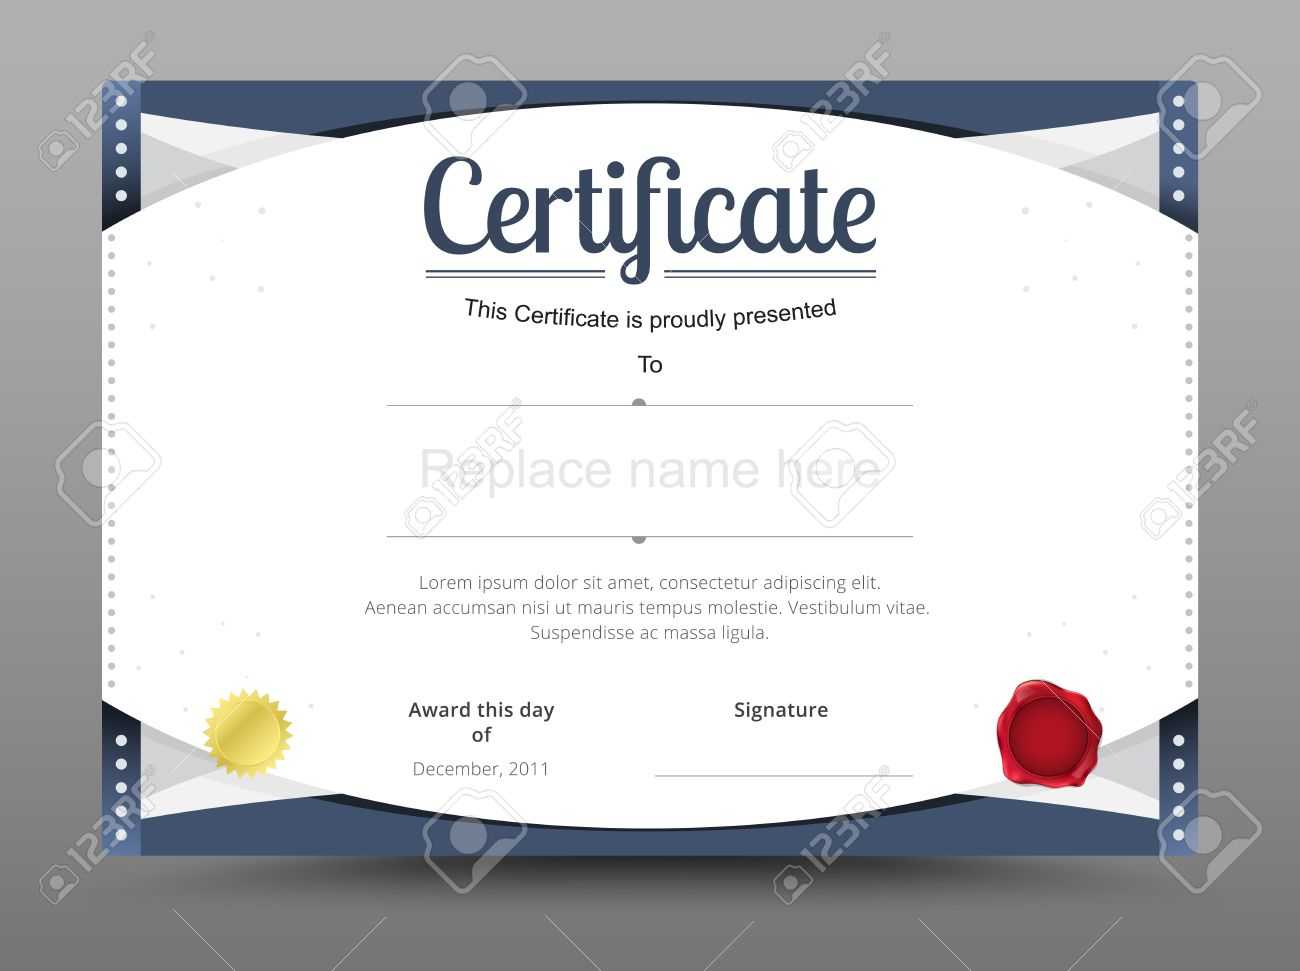 Elegant Certificate Template. Business Certificate Formal Theme With Regard To Elegant Certificate Templates Free